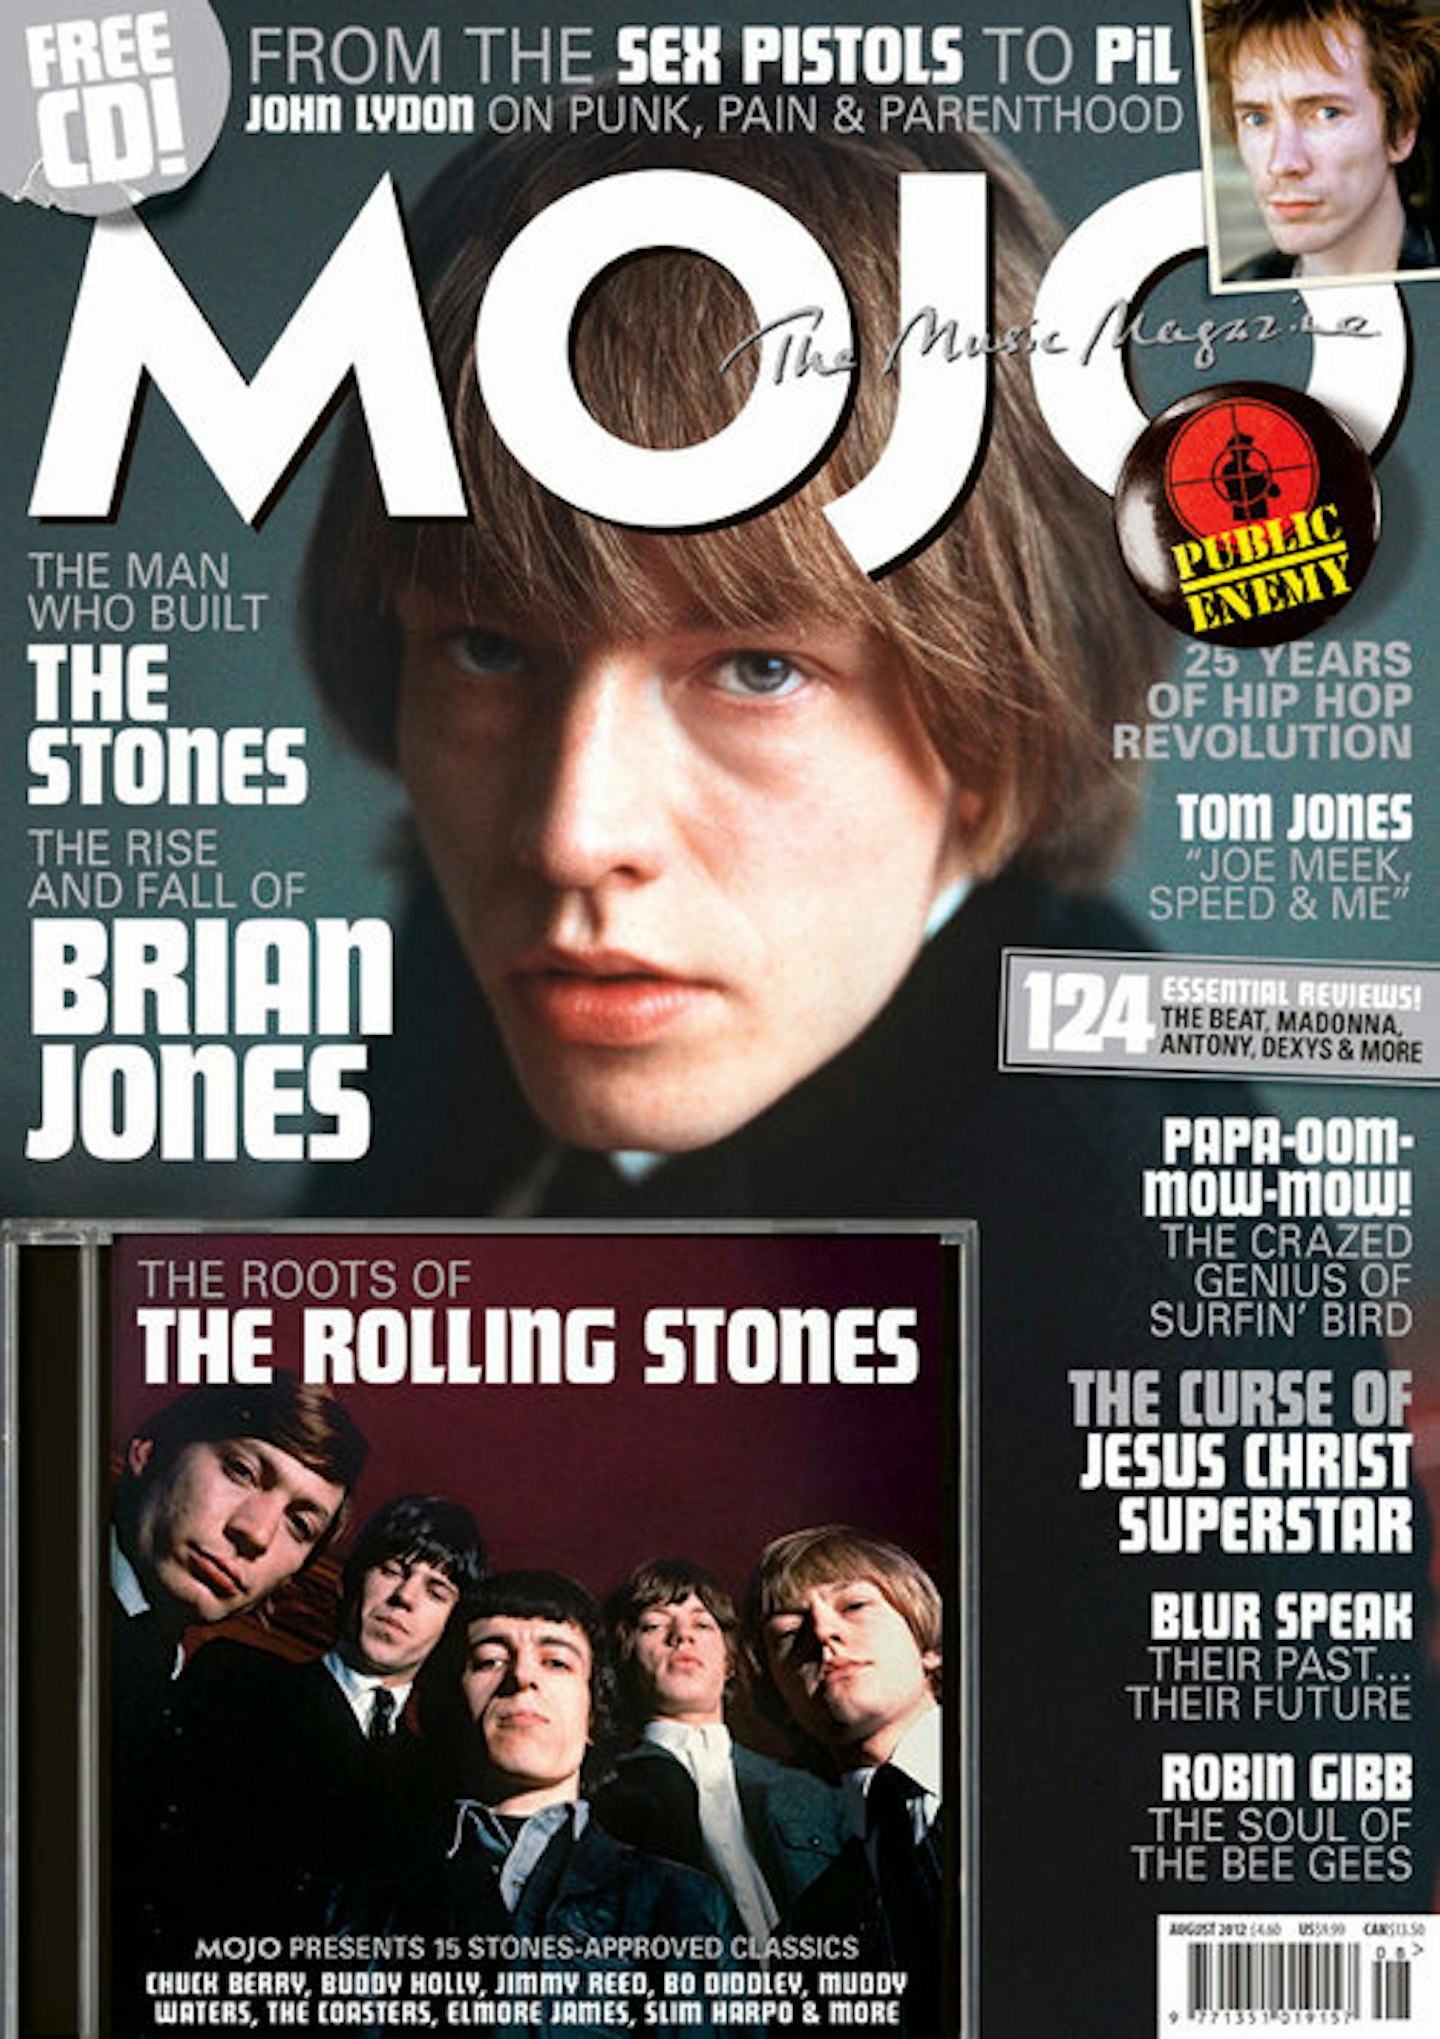 MOJO Issue 225 / August 2012